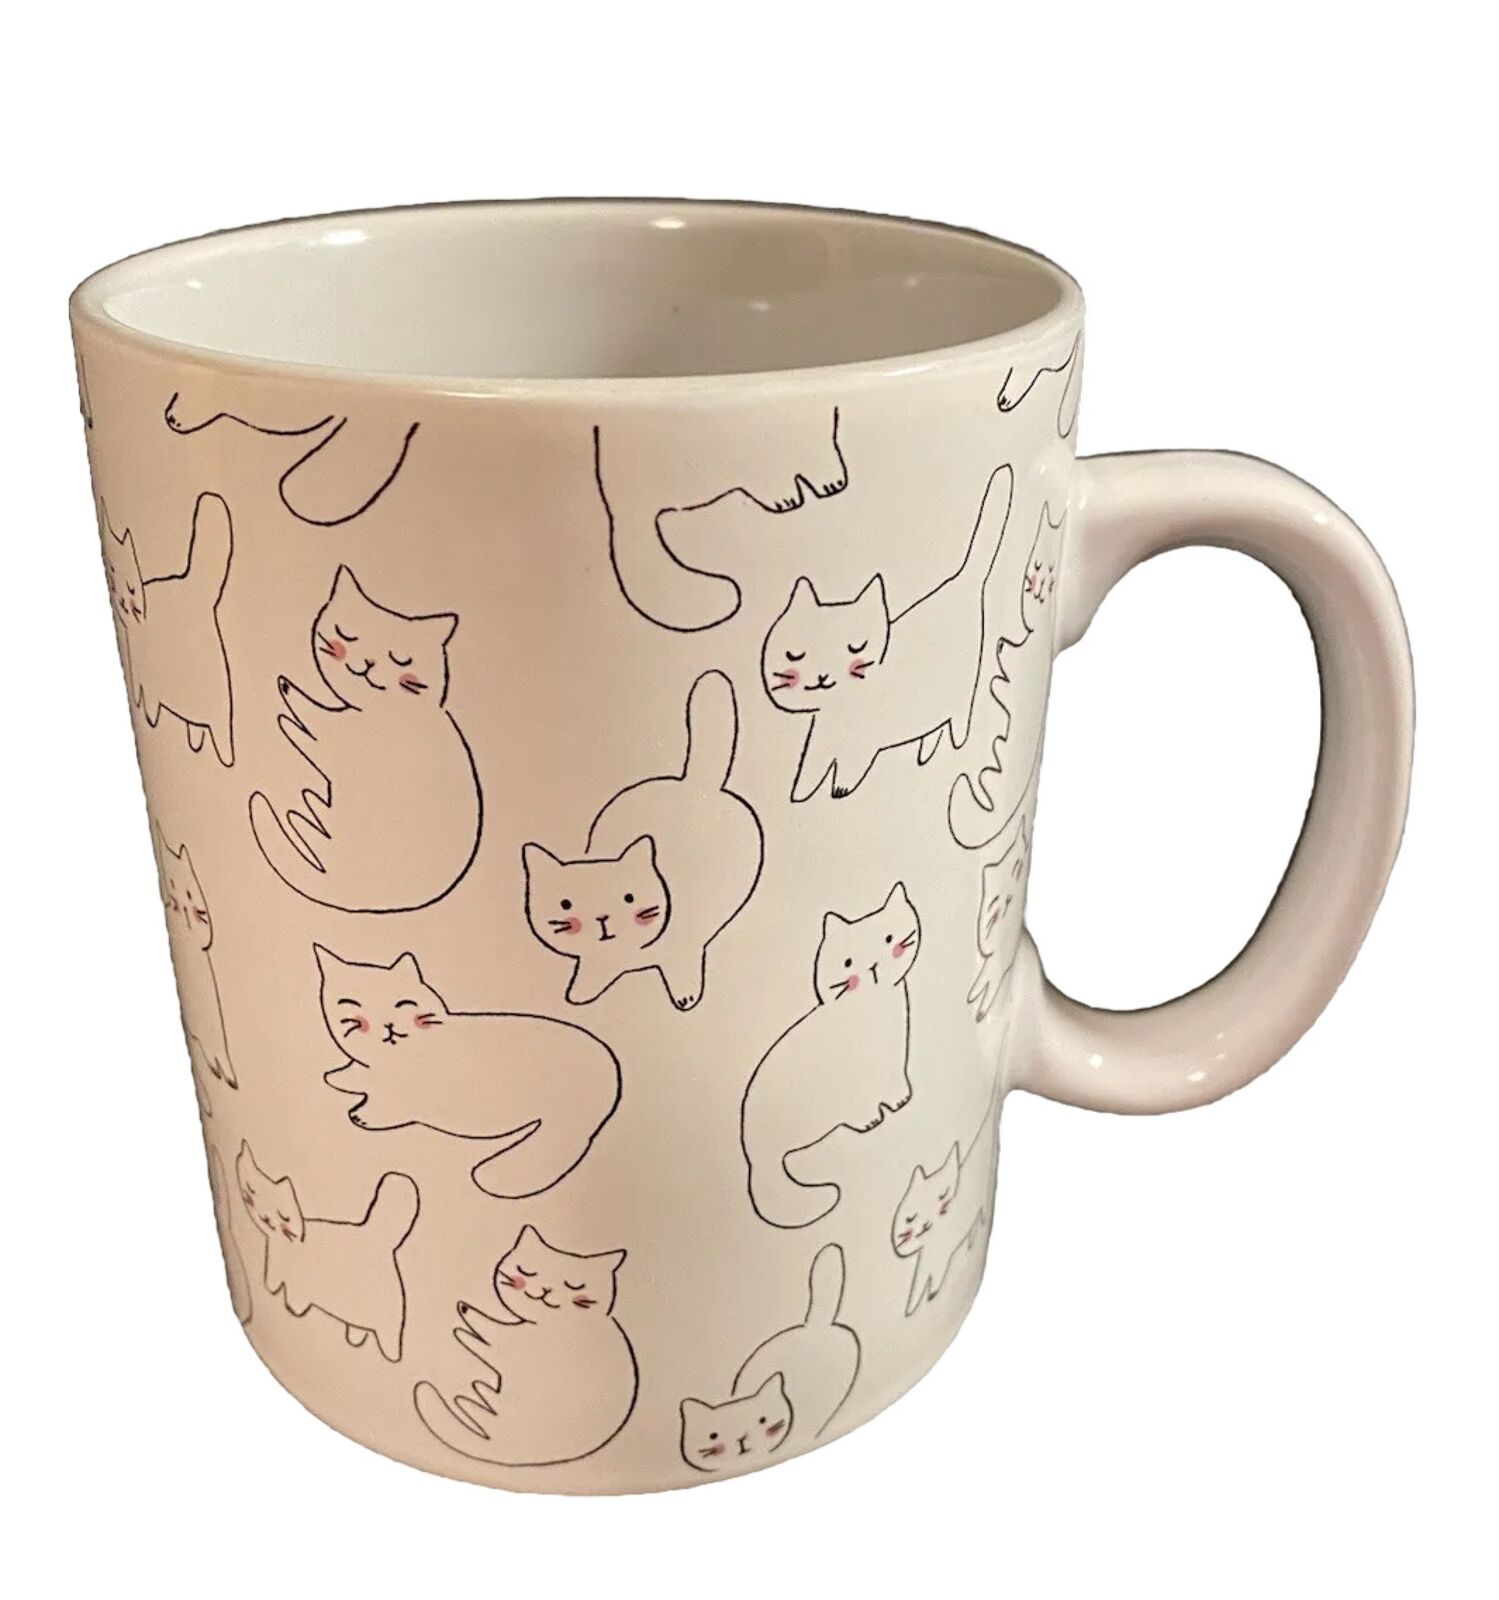 Large White Coffee Mug with Blushing Gray Kitty Cats Cup by Fringe Studios